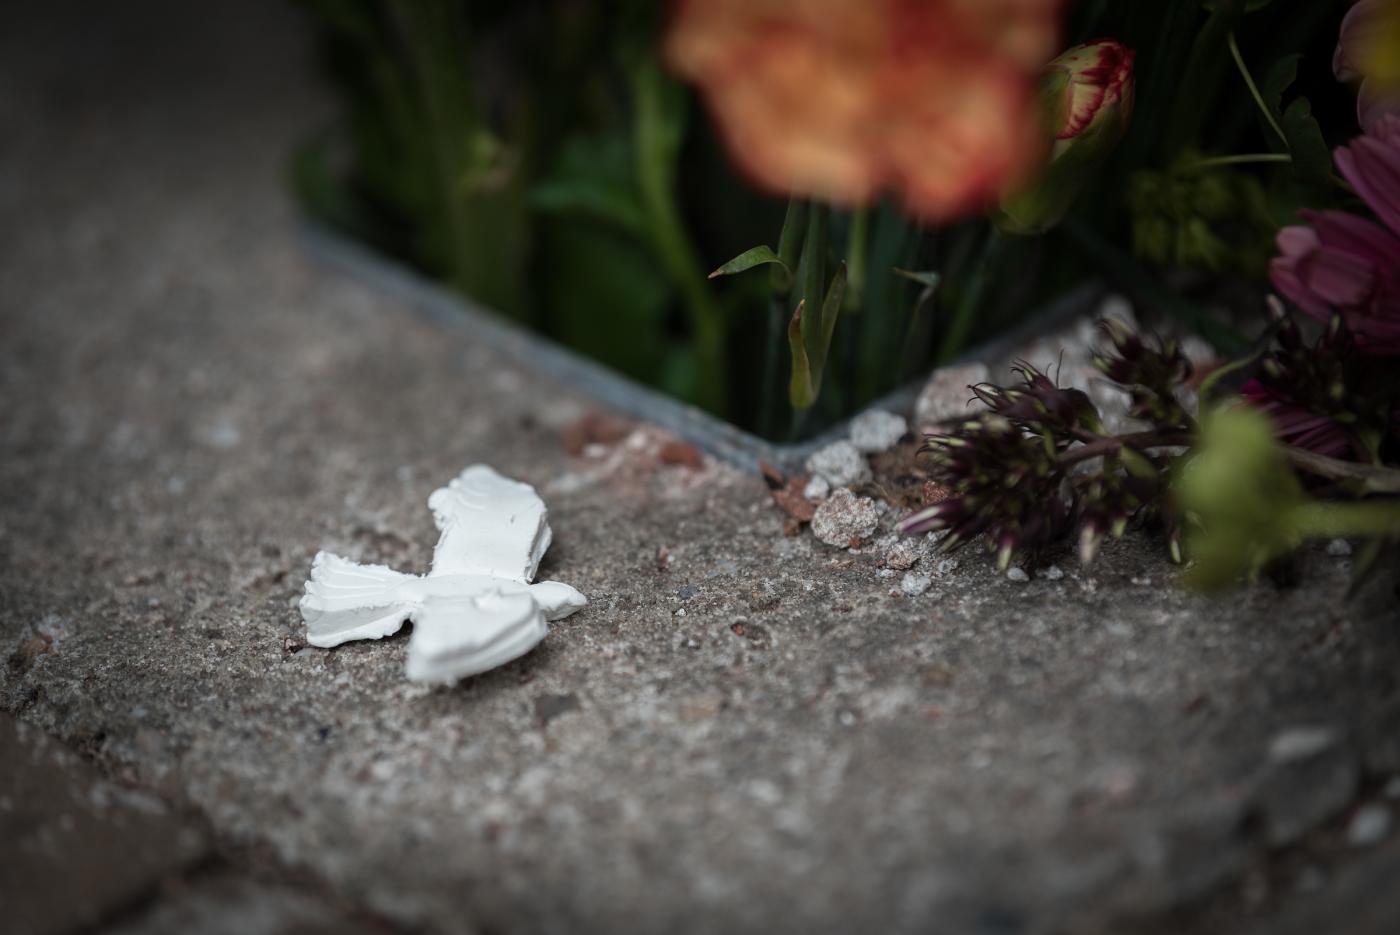 A picture of a plaster dove lying on the ground